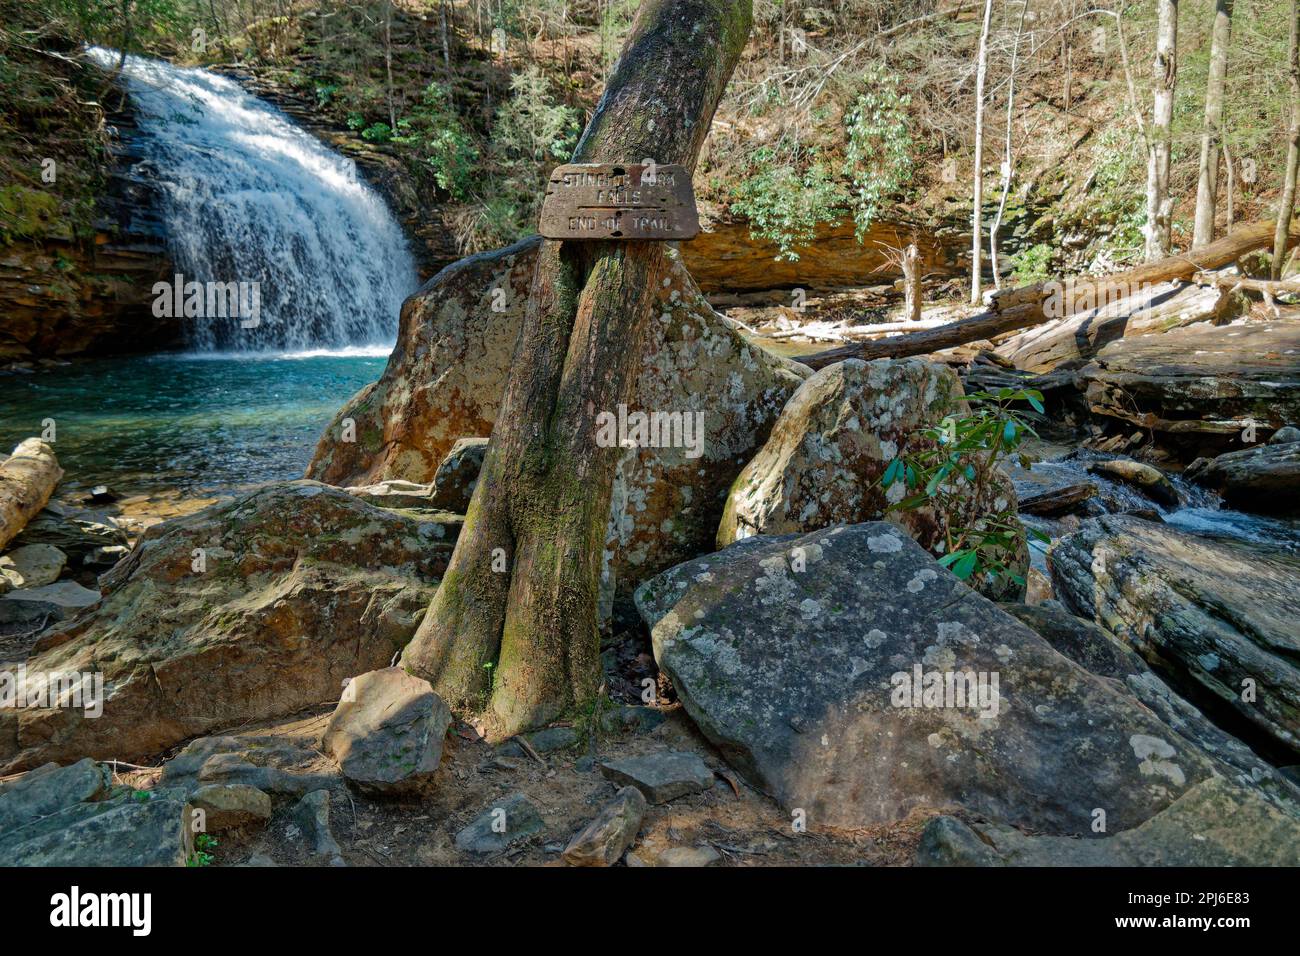 An old sign on a tree saying Stinging fork falls end of trail where it ends with the waterfall spilling in a turquoise color pool in the background an Stock Photo